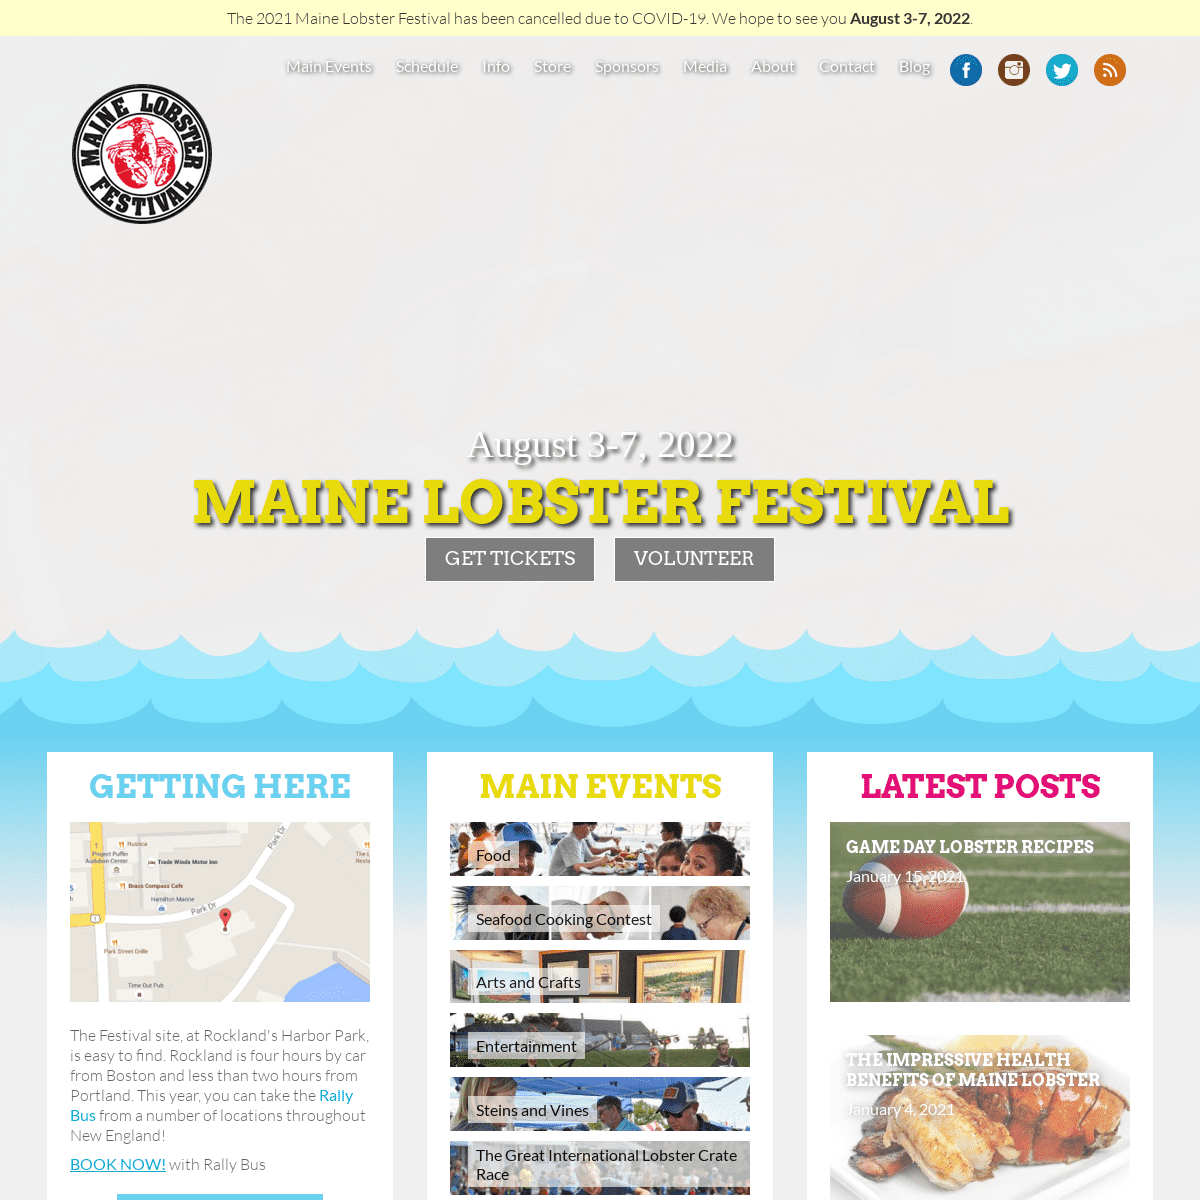 A complete backup of https://mainelobsterfestival.com